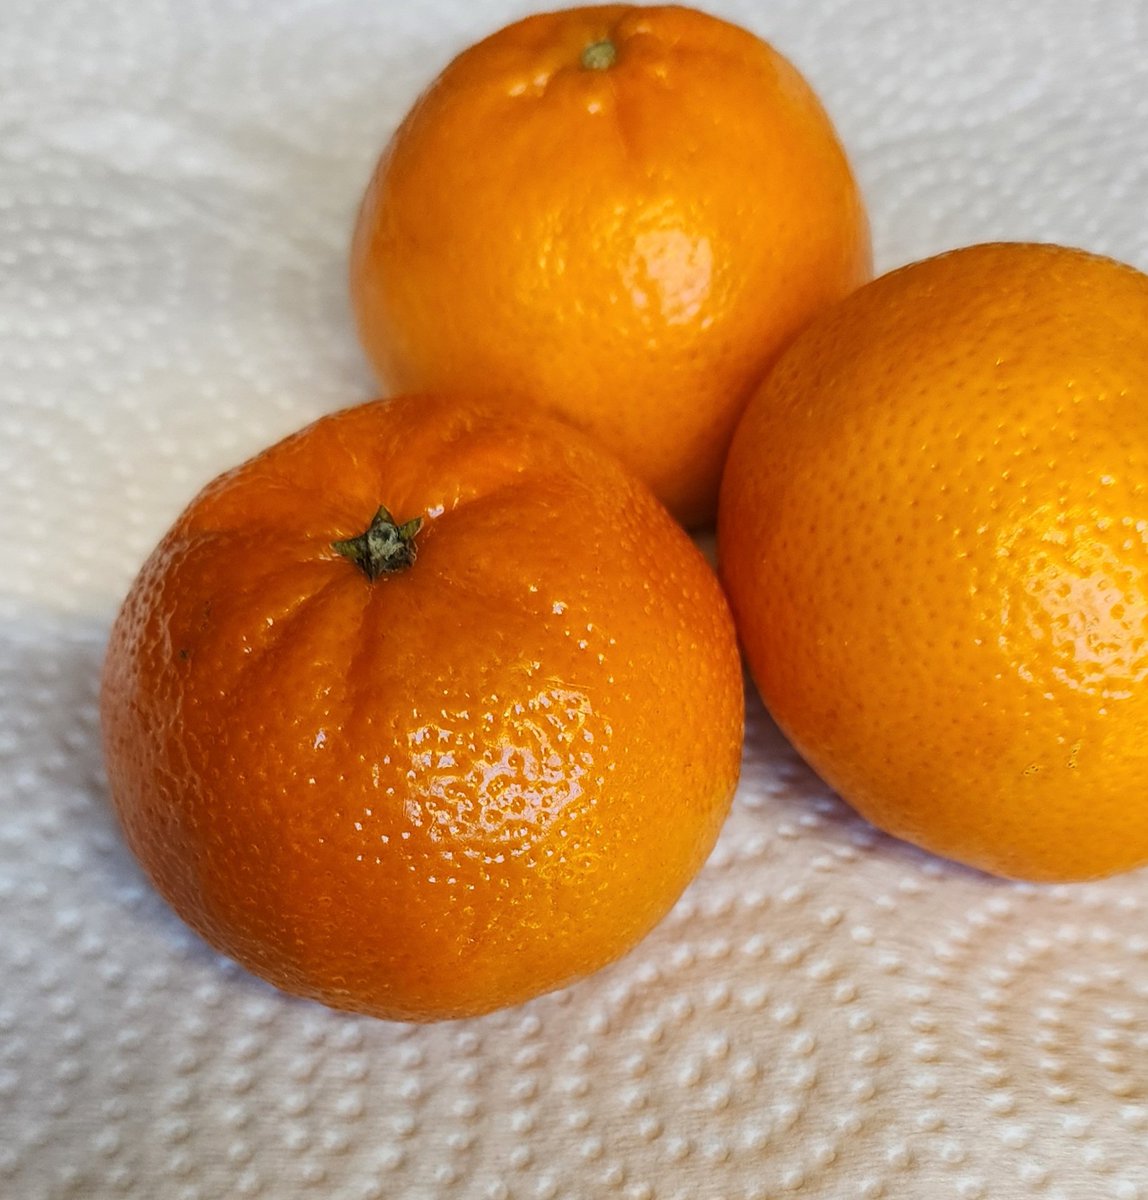 Good Morning Resister. I'm on break eating some tangerines. I hope you guys have a beautiful day.